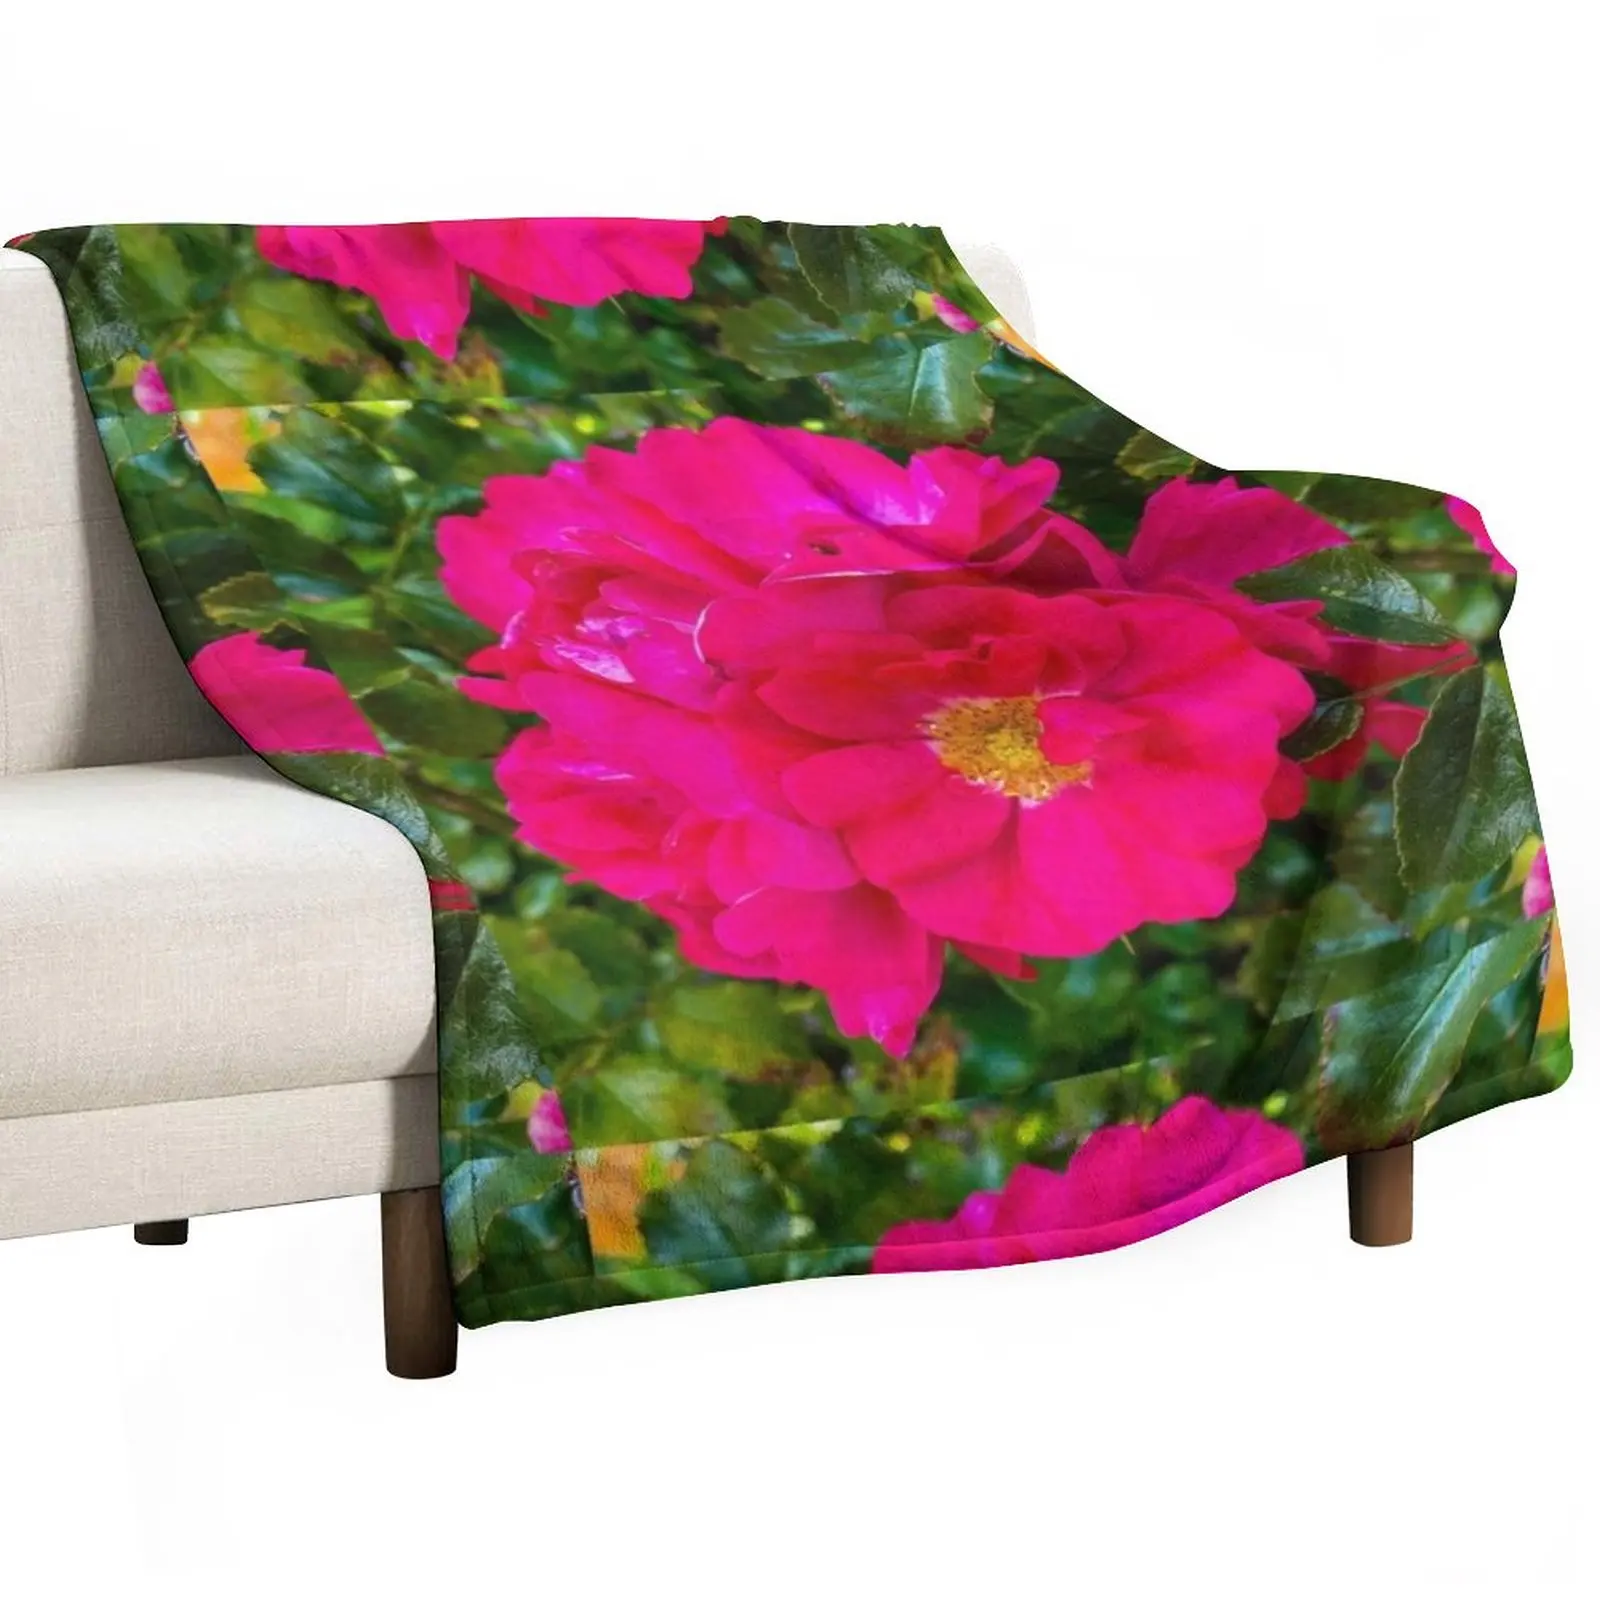 

New Bright Pink Roses Are My Favourite Throw Blanket Nap Blanket Thermal Blankets For Travel Decorative Sofa Blanket wednesday